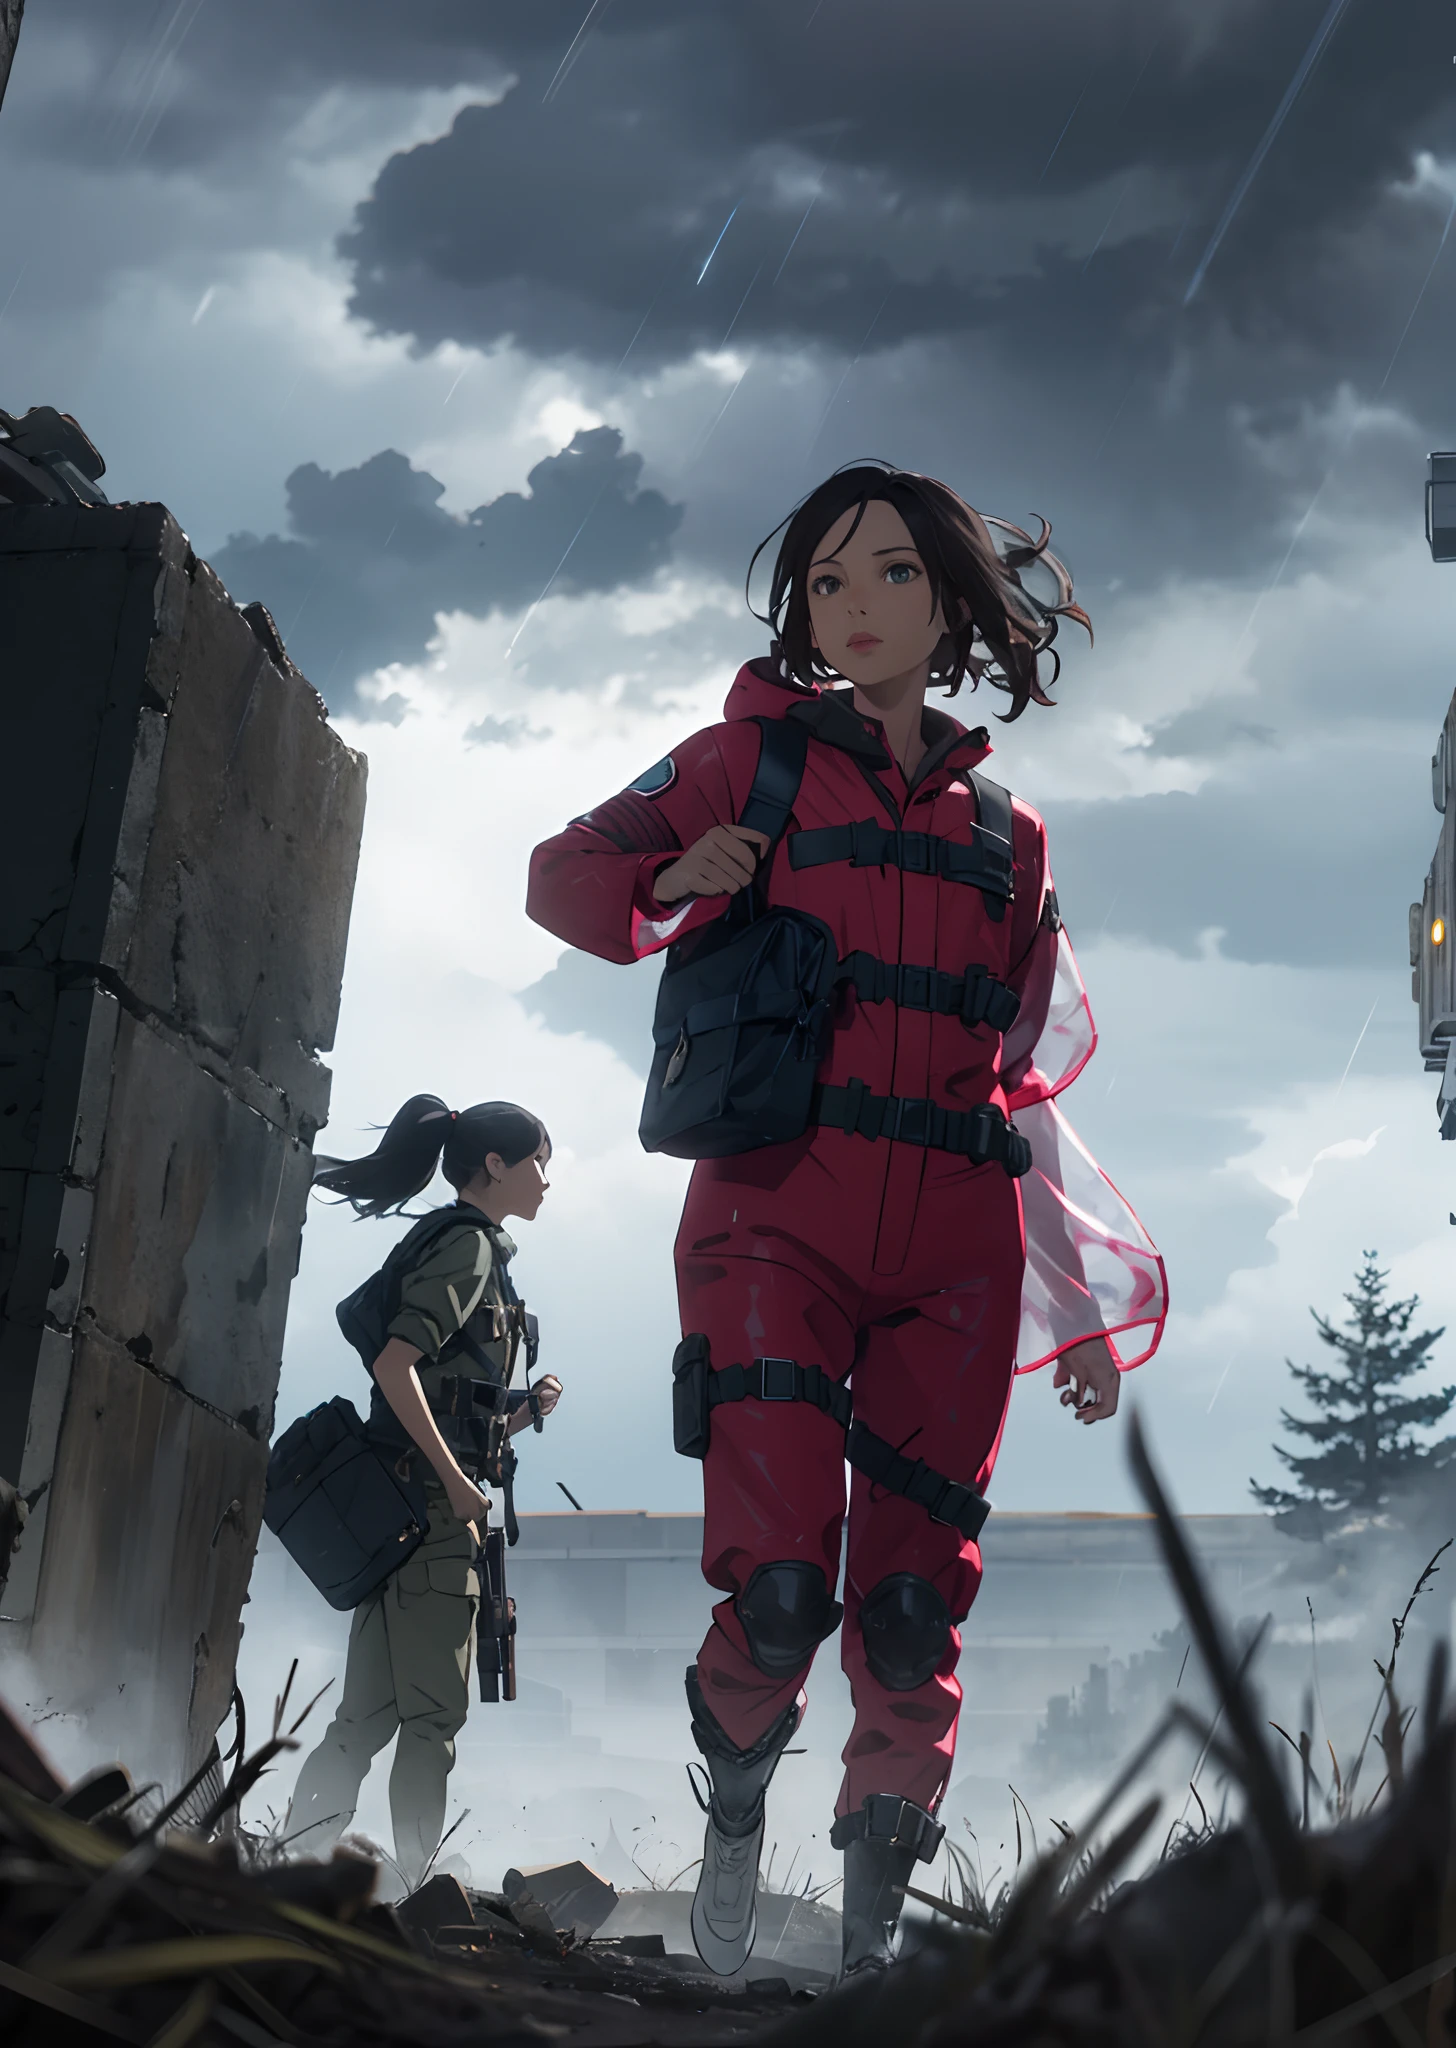 The pink girl wears a storm suit and carries a bag on the battlefield